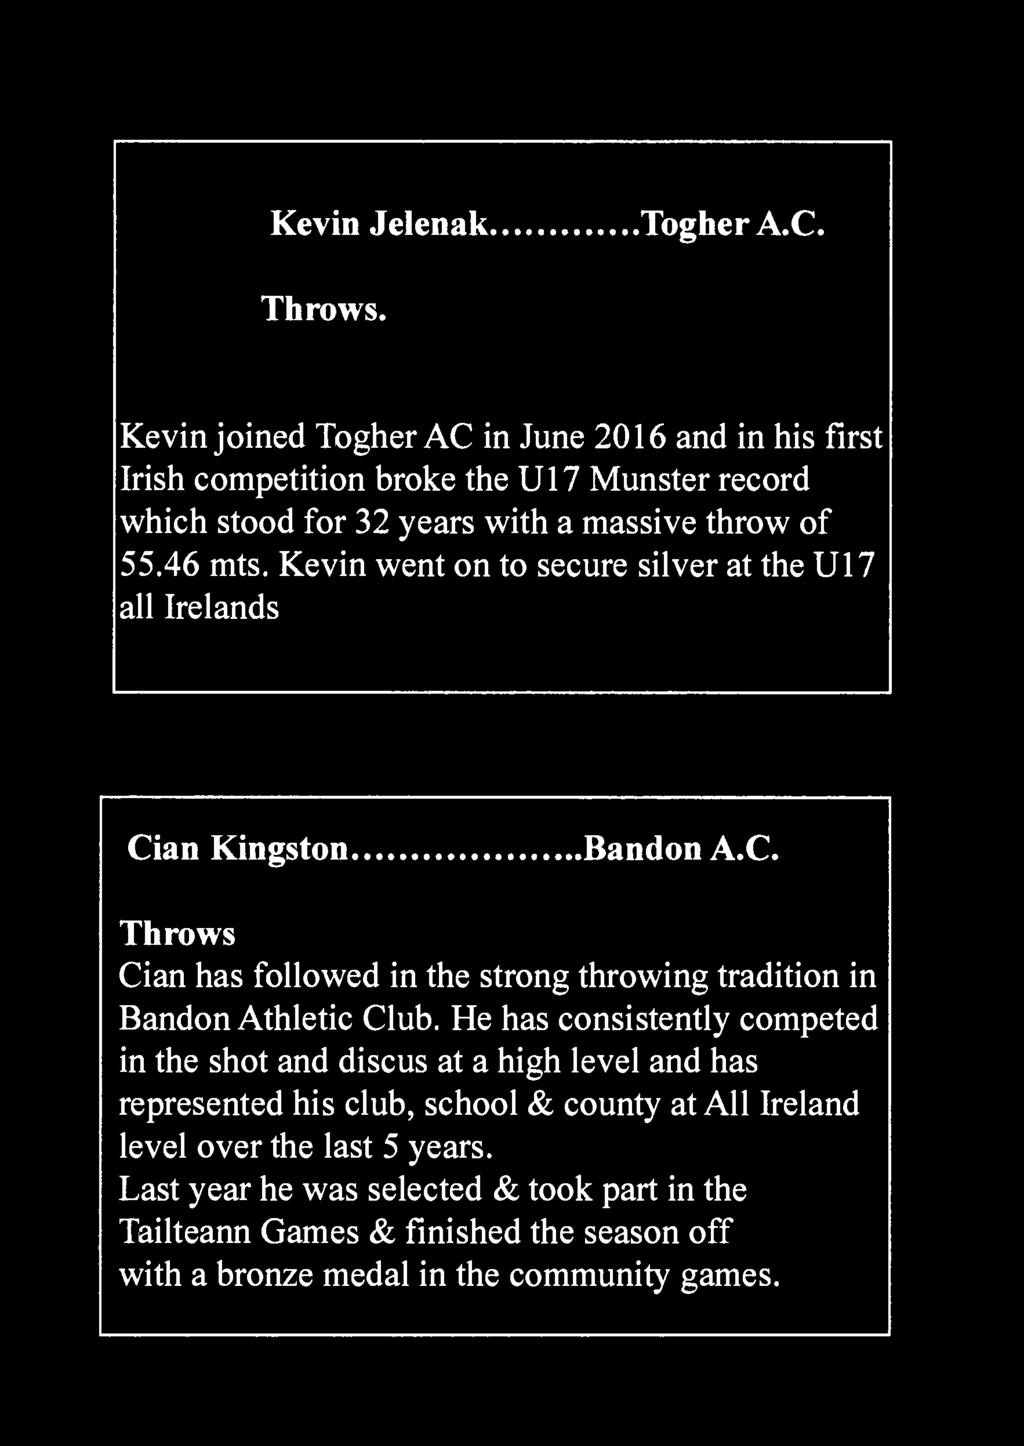 Kevin went on to secure silver at the U17 all Irelands Cian Kingston Bandon A.C. Throws Cian has followed in the strong throwing tradition in Bandon Athletic Club.